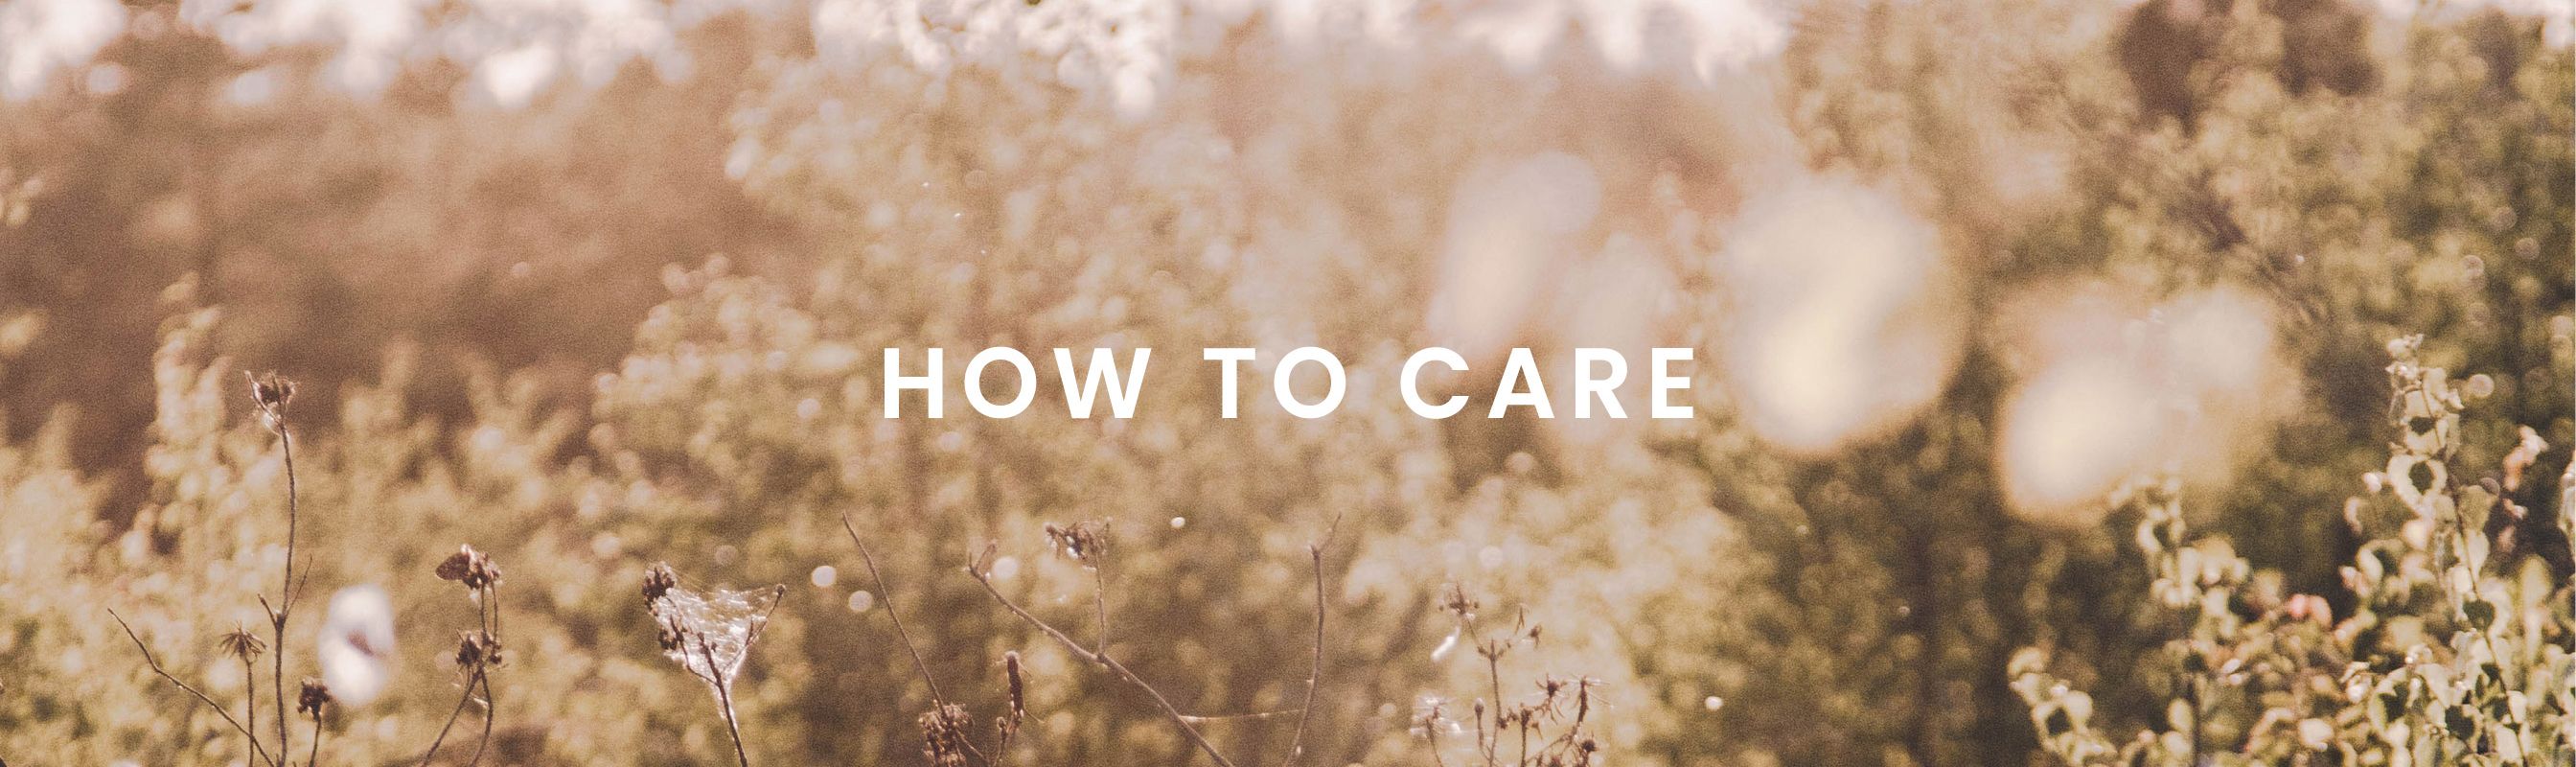 How to care